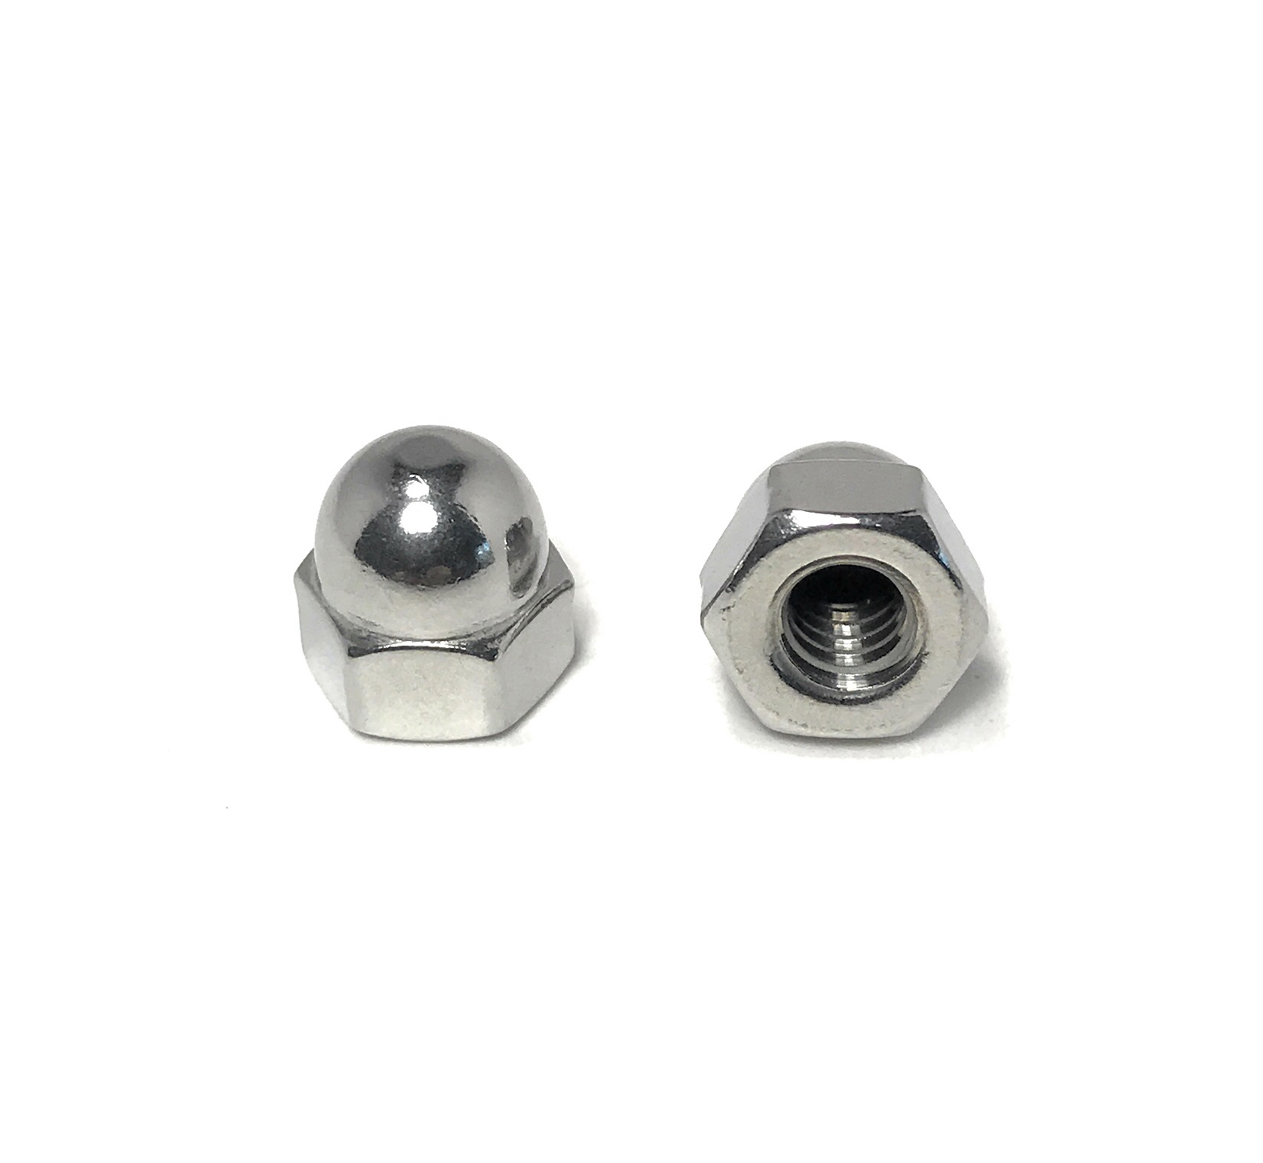 Qty-25 Stainless Steel  Acorn Cap Hex Nuts NC 3/8-16 